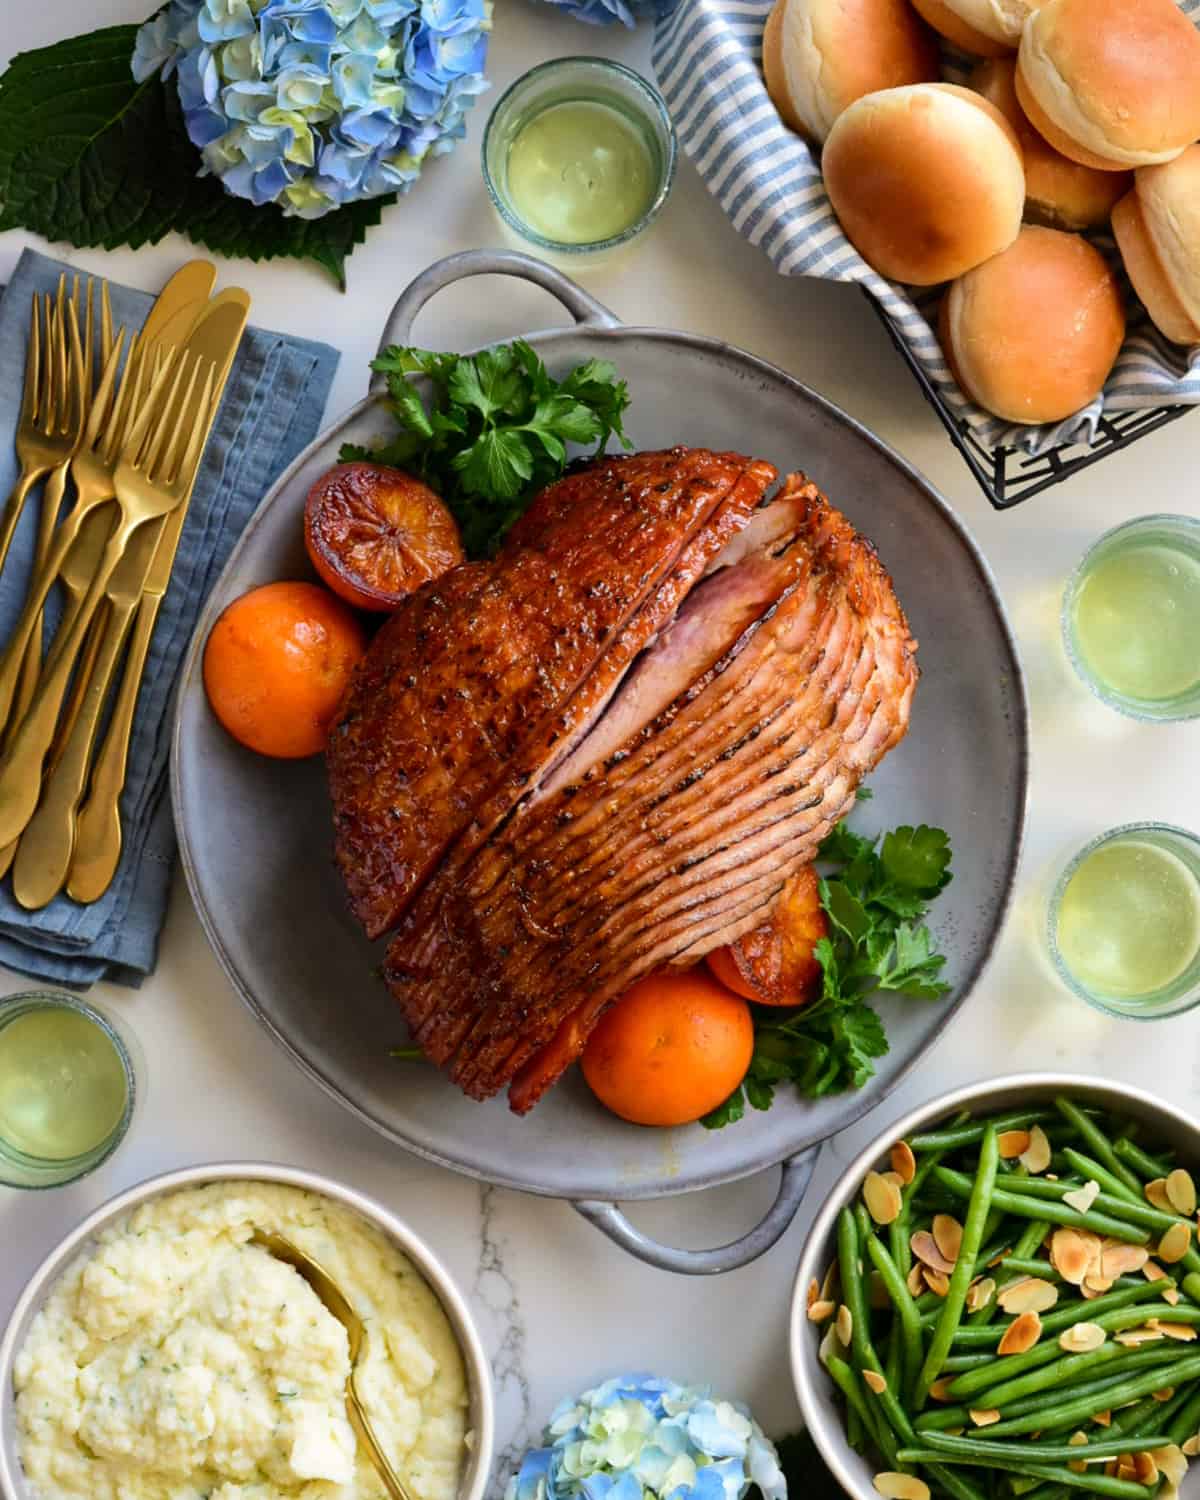 A glossy, sliced Minneola glazed Spiral Ham served with mashed potatoes, green beans and bread.